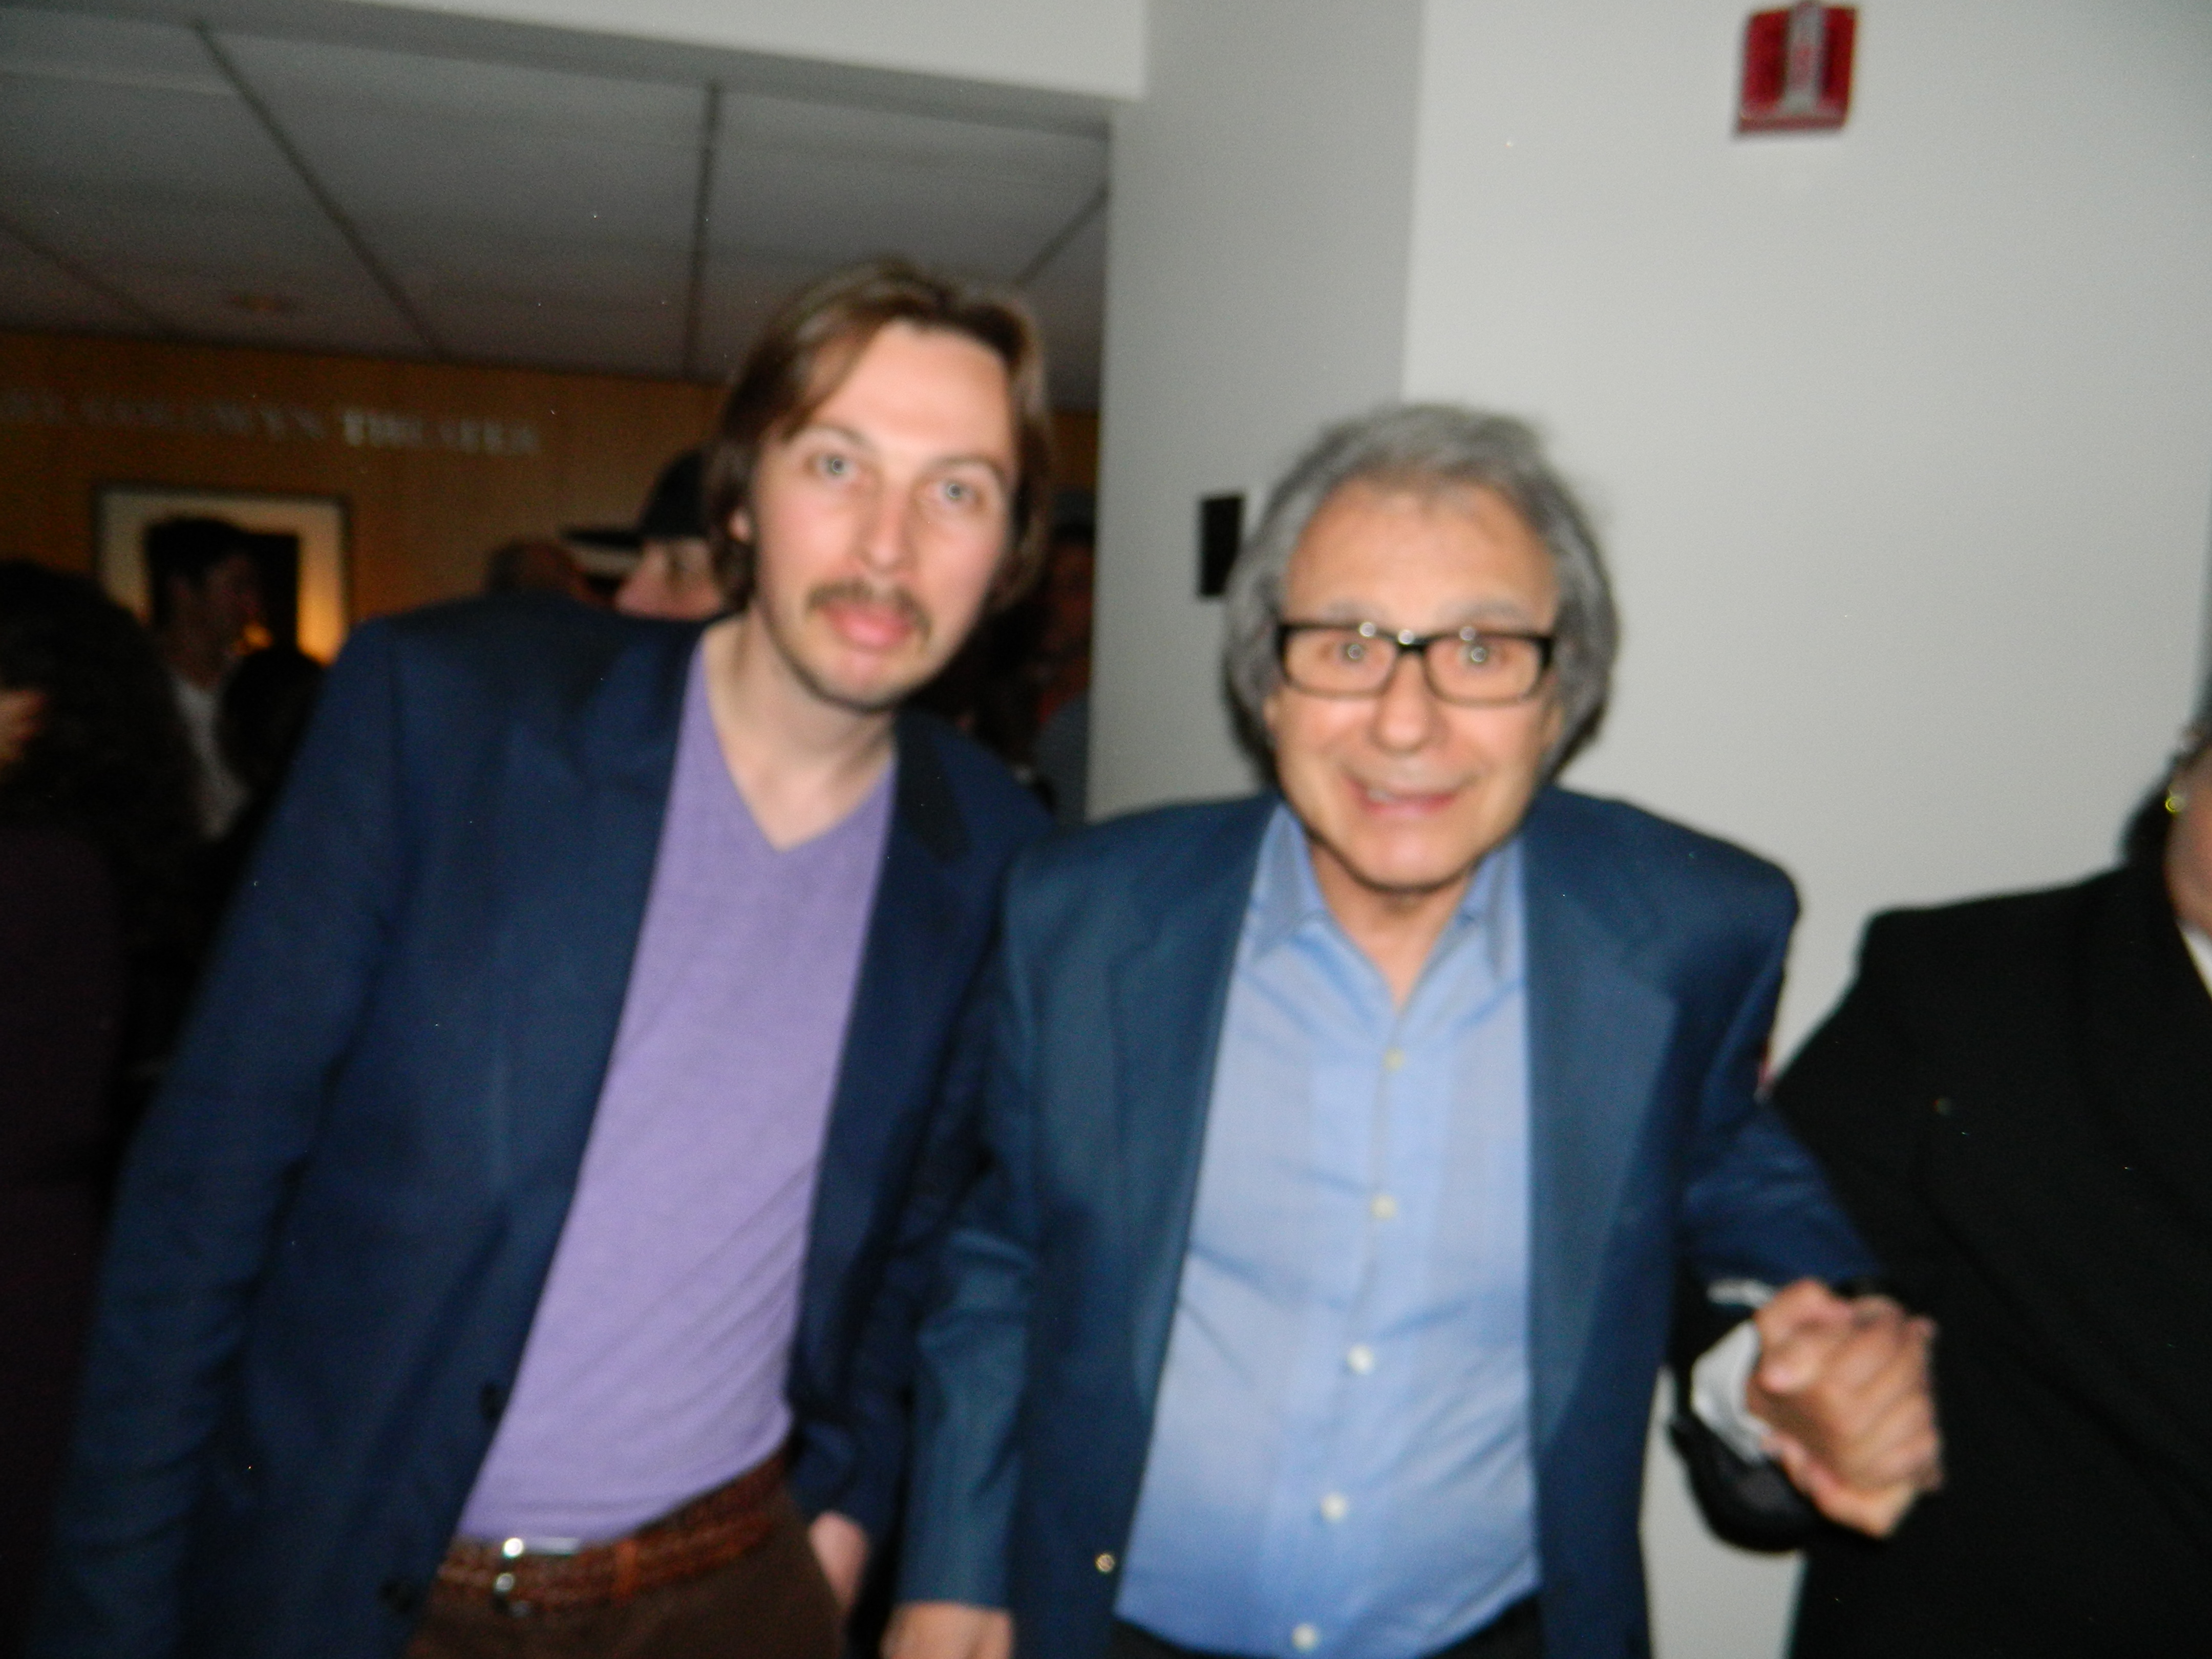 Gregoer Boru with Composer Lalo Schifrin at The Academy for Enter The Dragon.